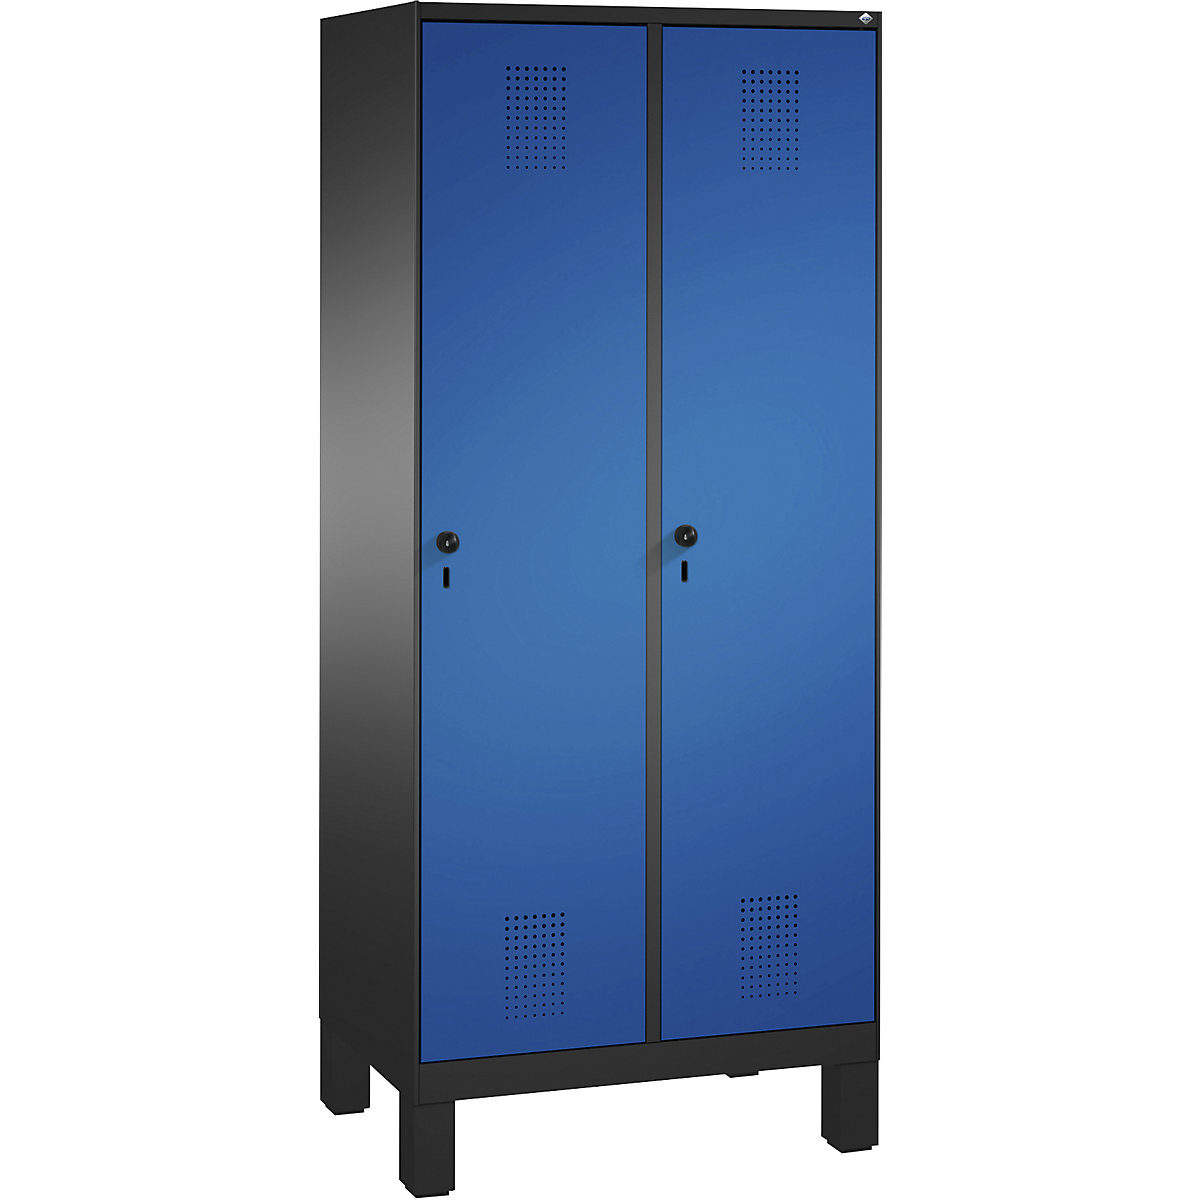 EVOLO cloakroom locker, with feet – C+P, 2 compartments, compartment width 400 mm, black grey / gentian blue-15